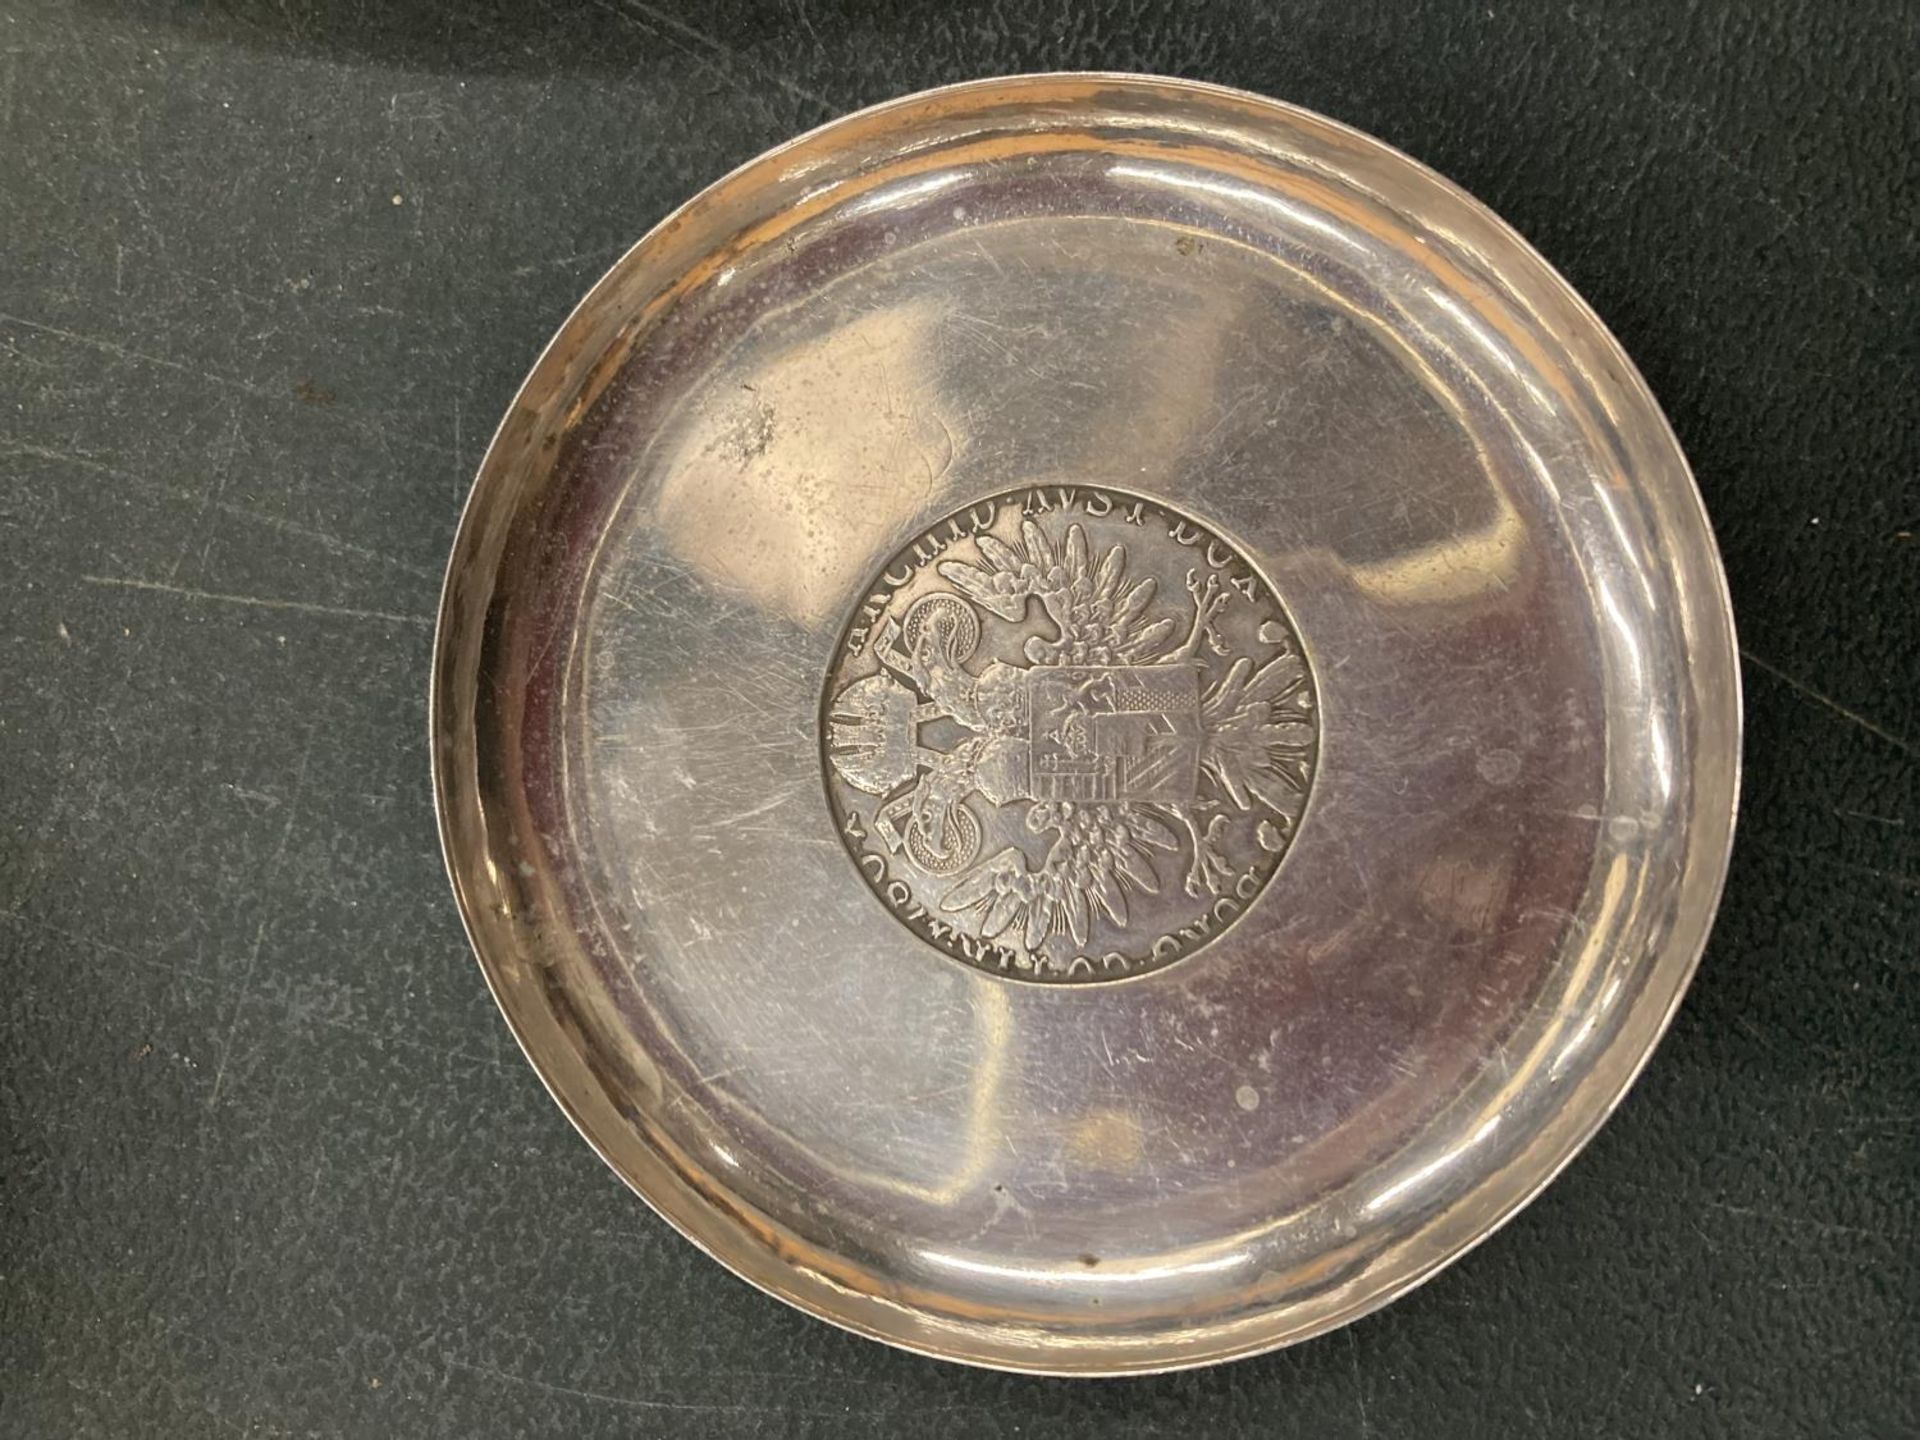 A DISH WITH A COIN STYLE INSERT